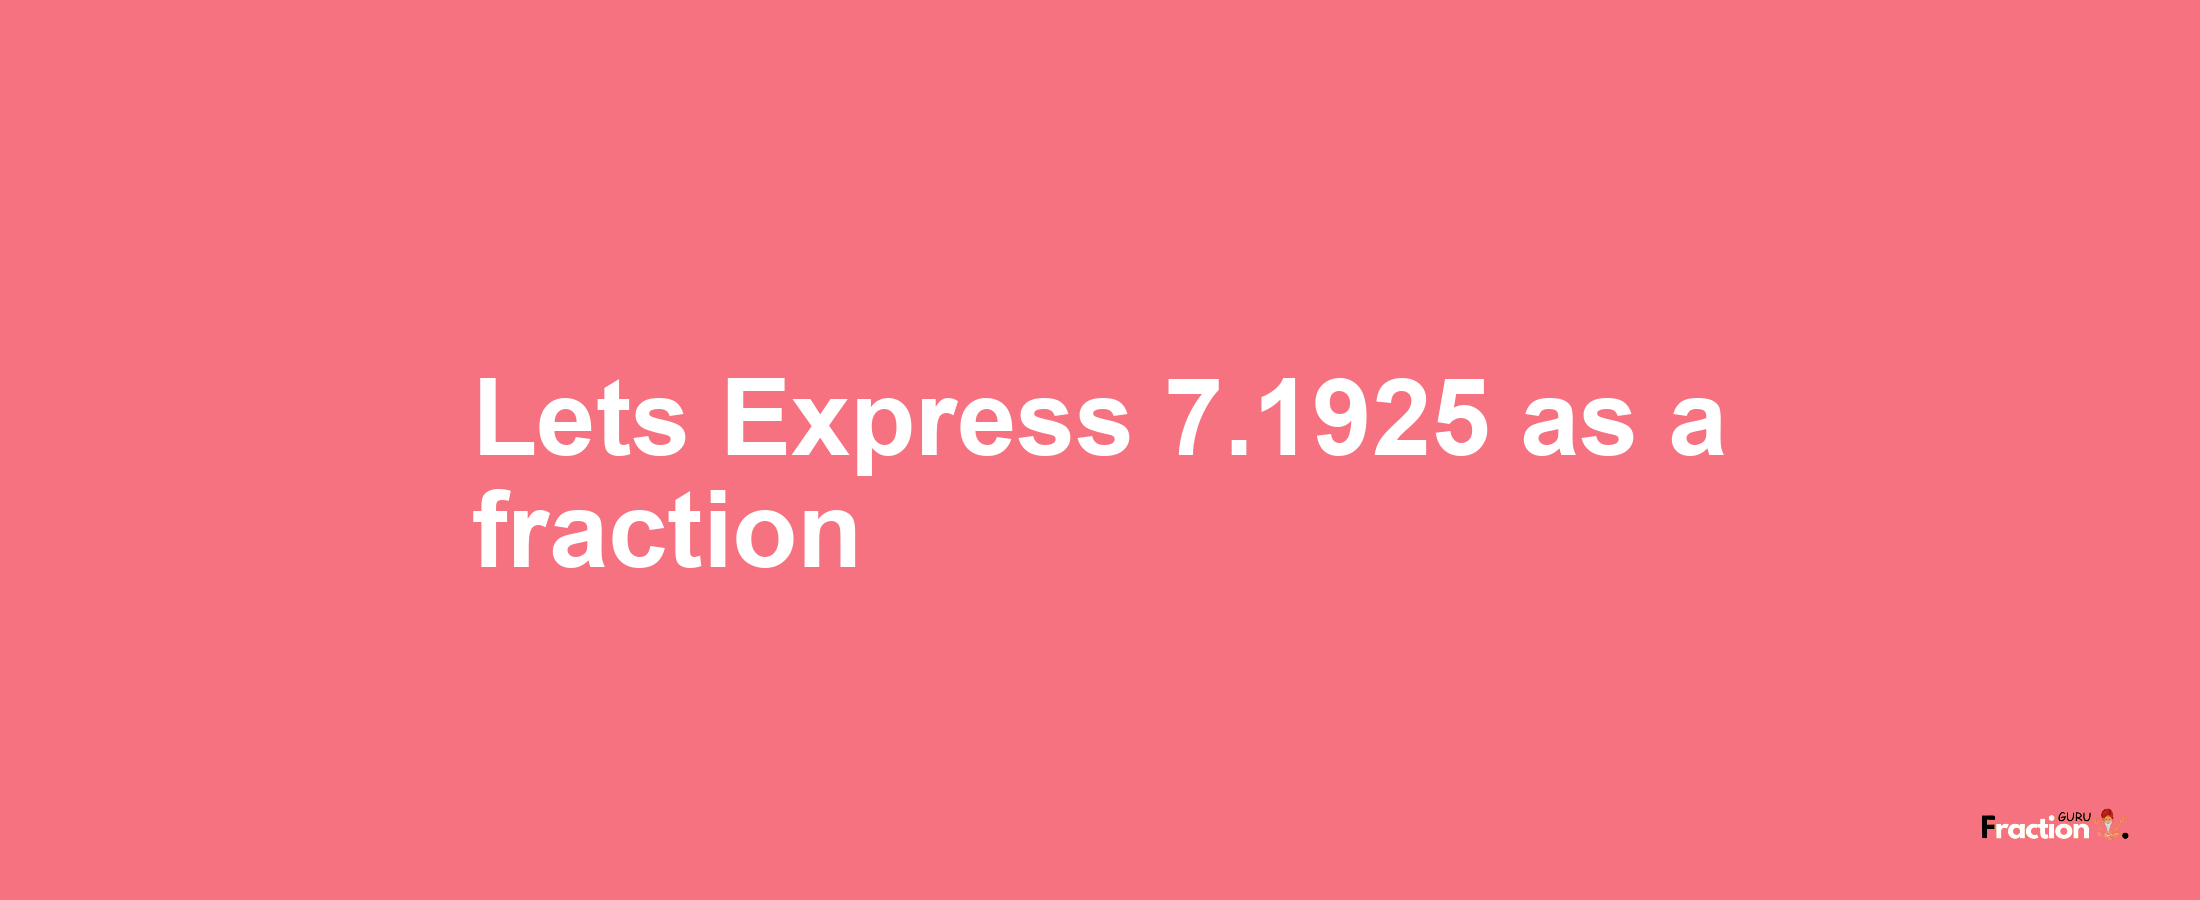 Lets Express 7.1925 as afraction